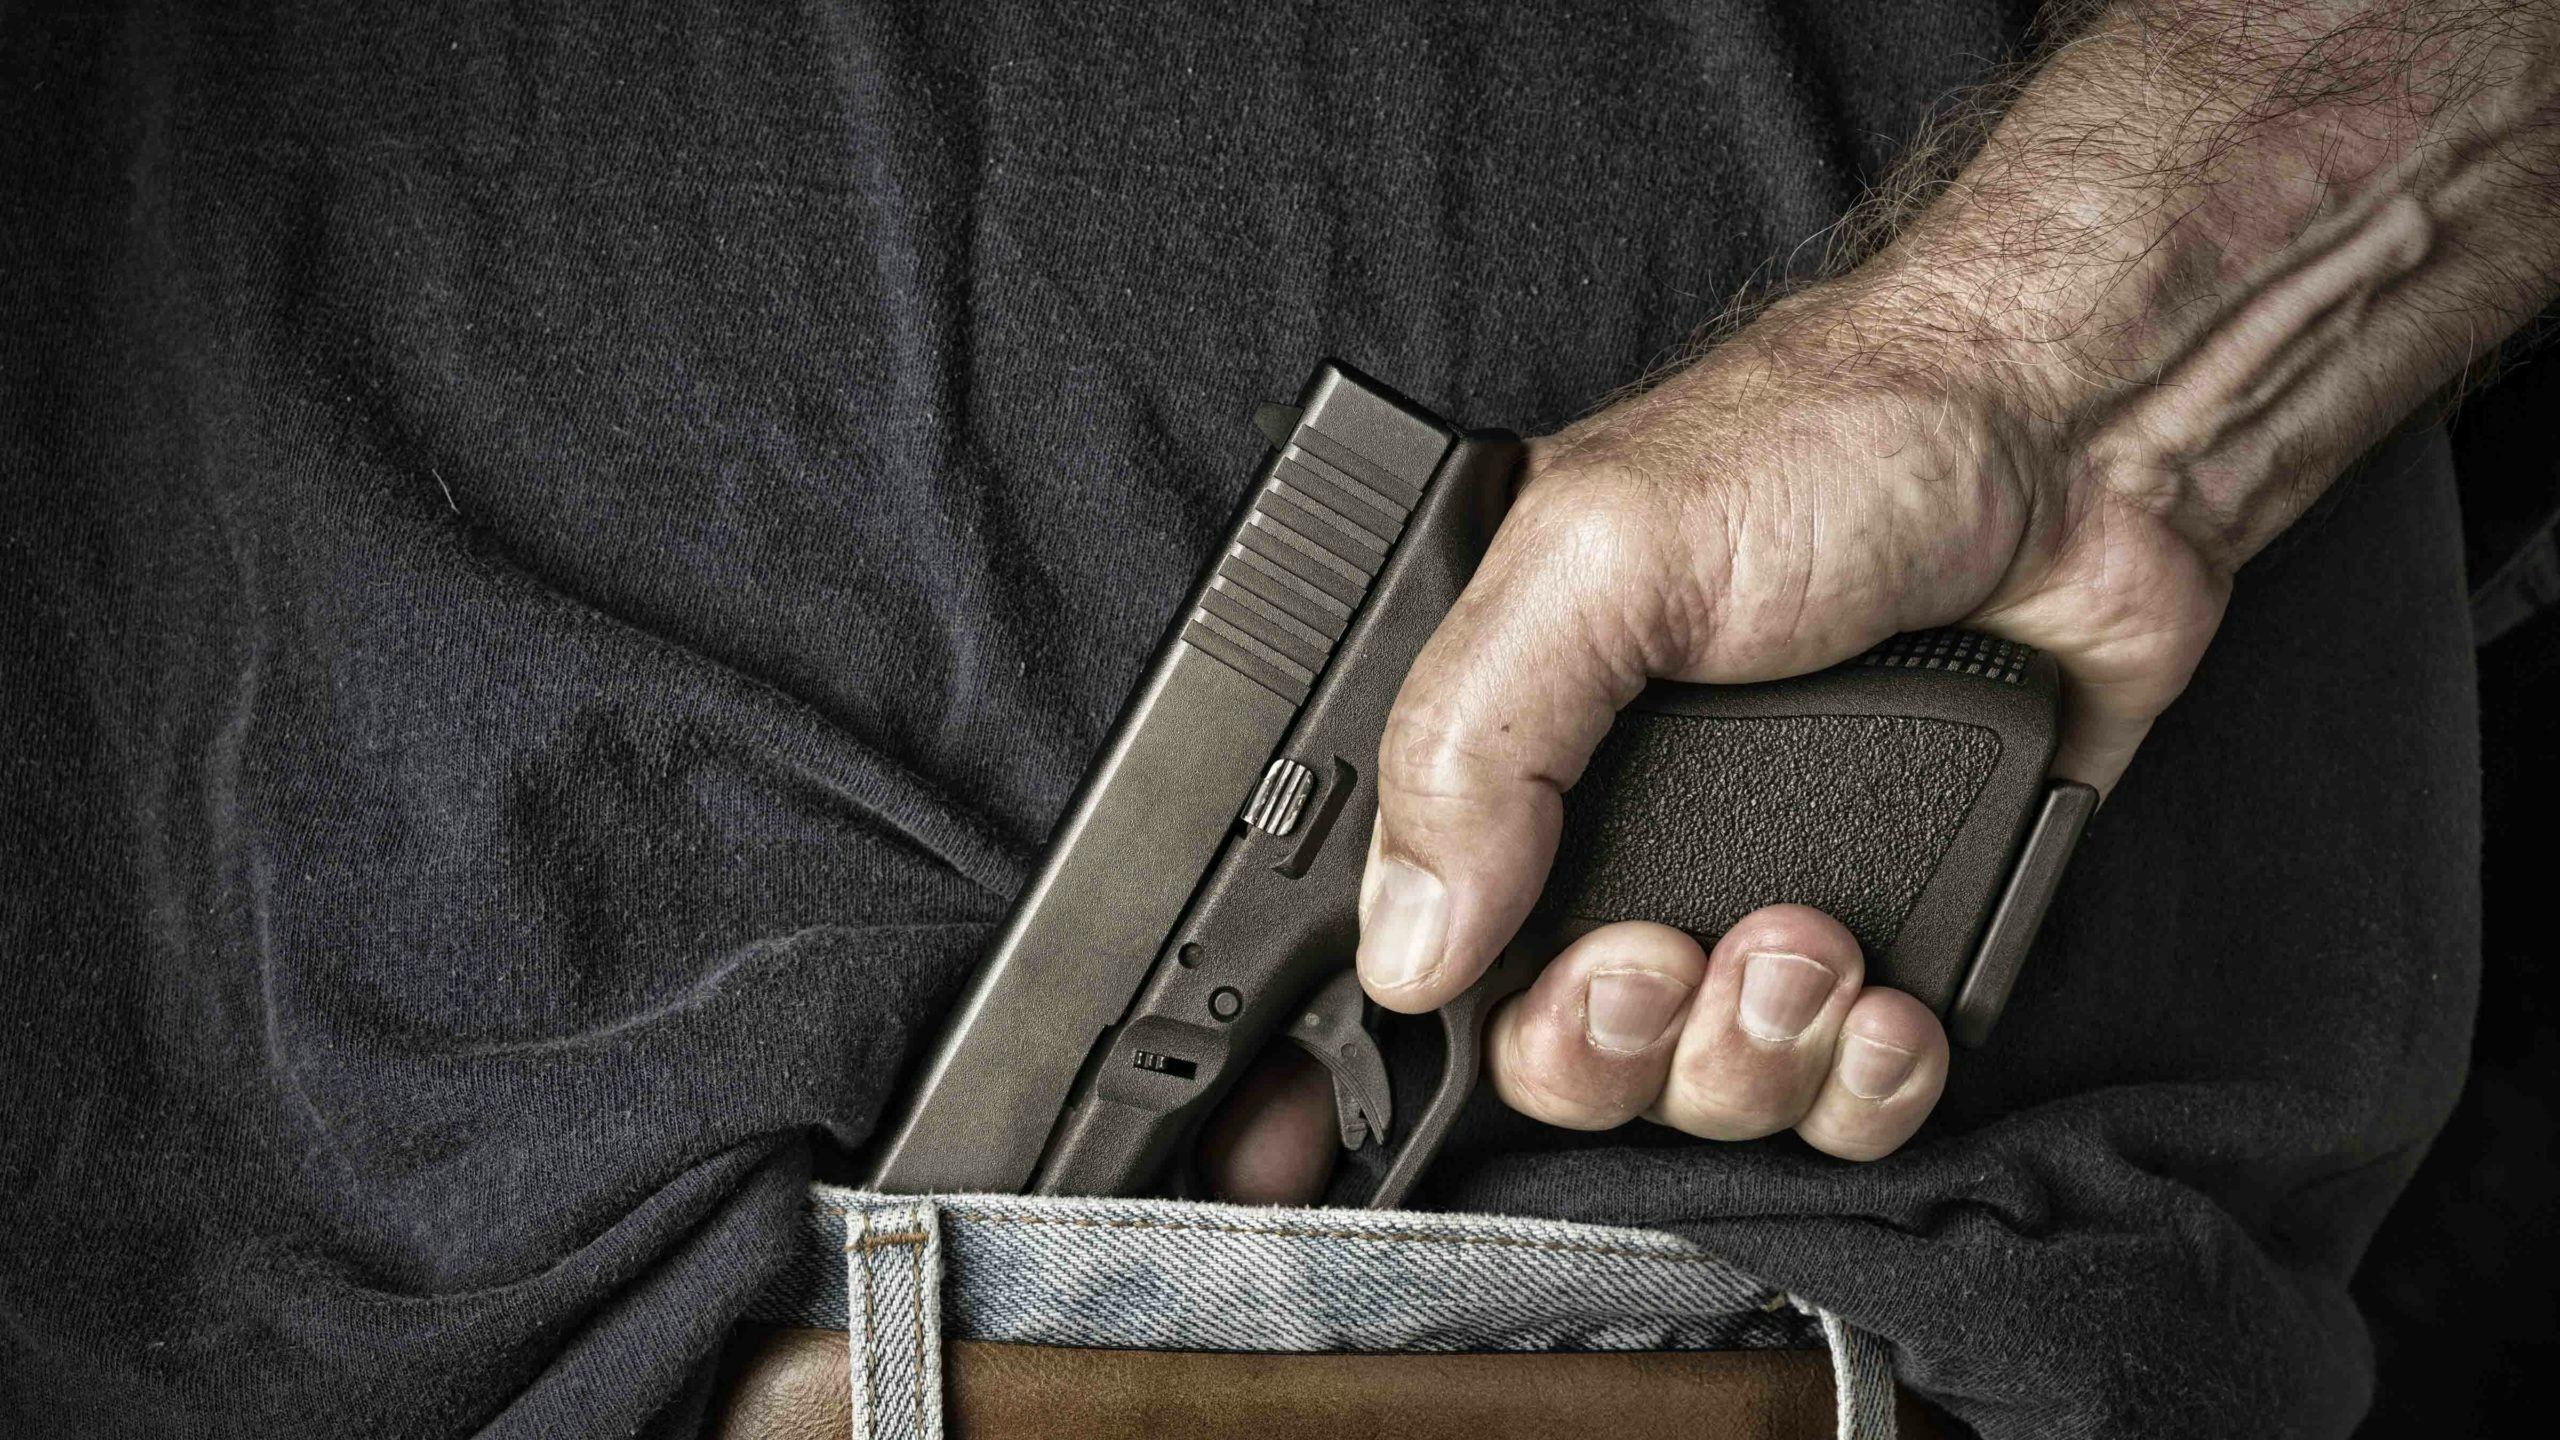 Concealed carry photo scaled